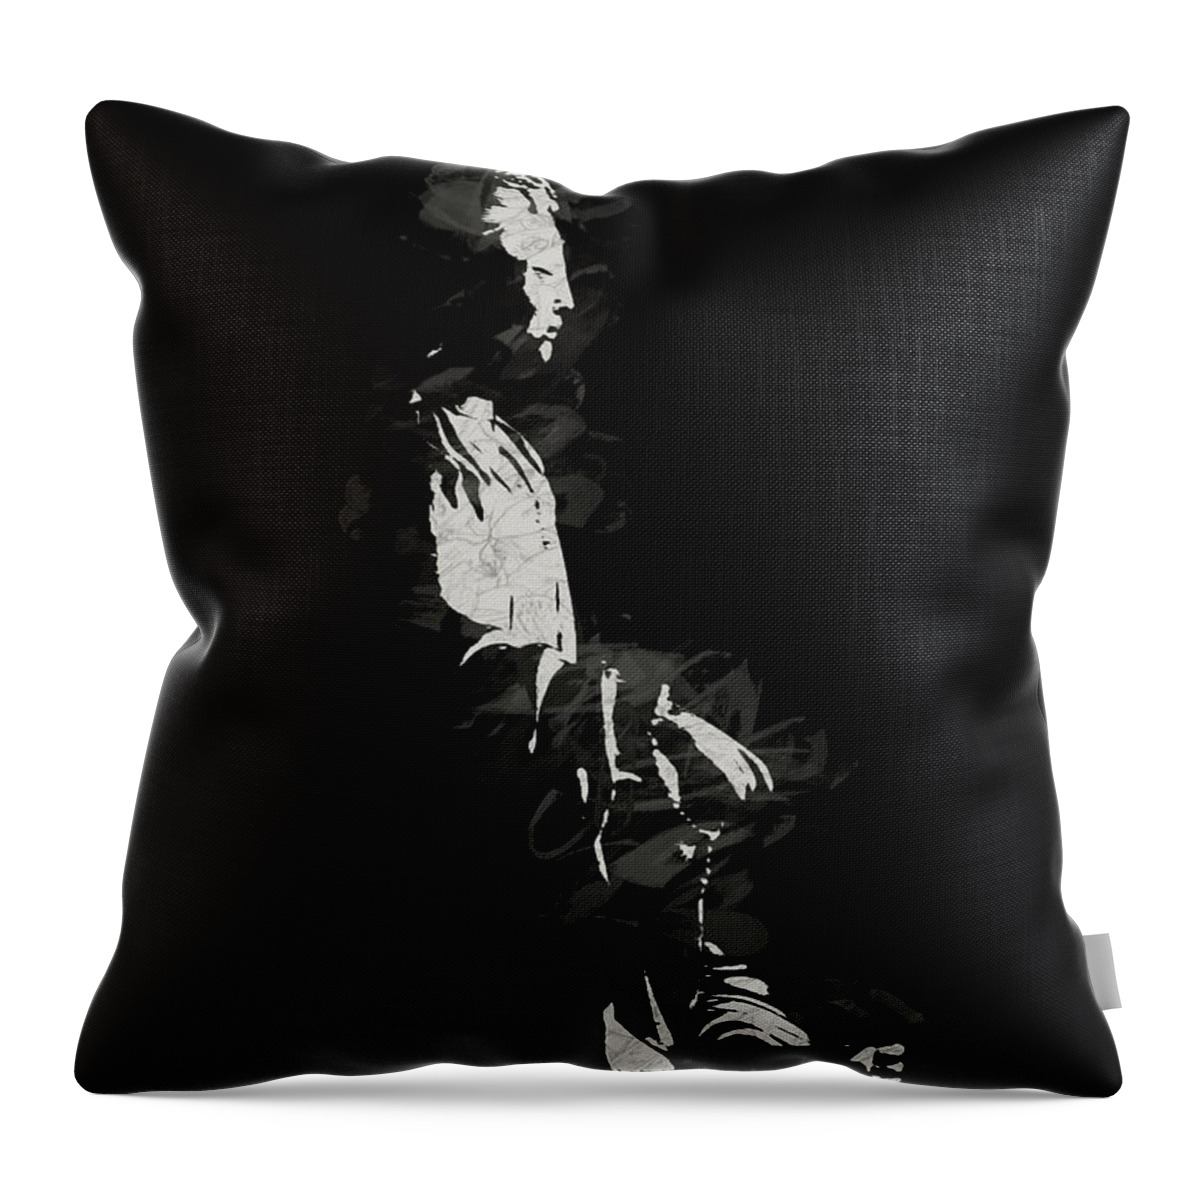  Zen Throw Pillow featuring the mixed media Calm Amidst Chaos by Kandy Hurley